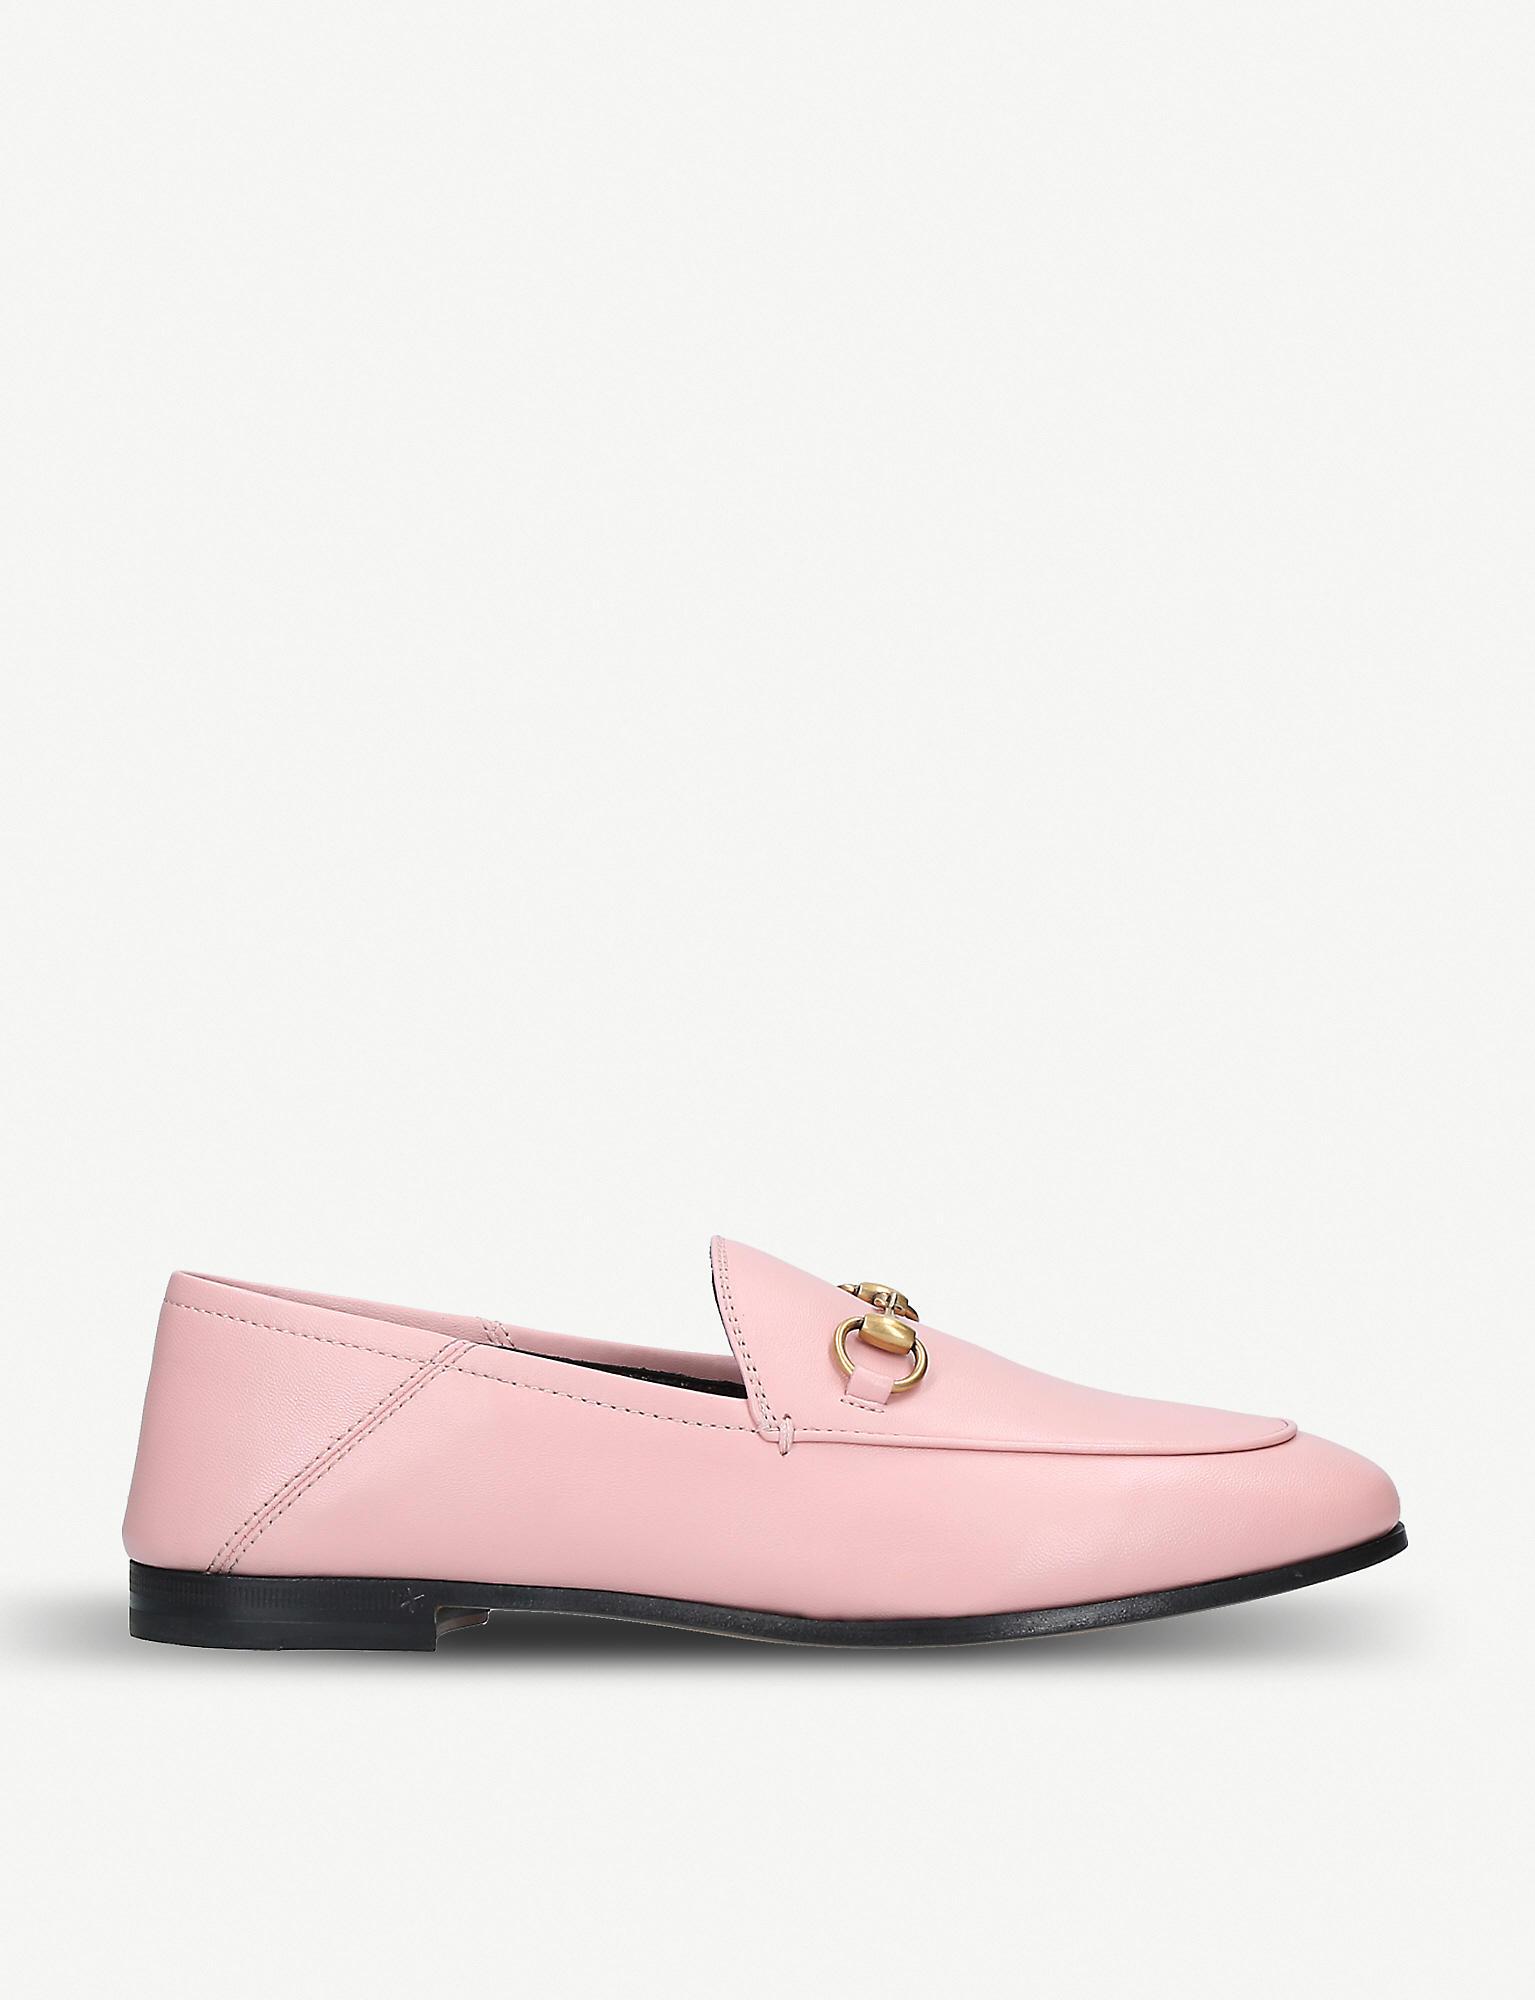 Gucci Brixton Collapsible Leather Loafers in Pink - Lyst